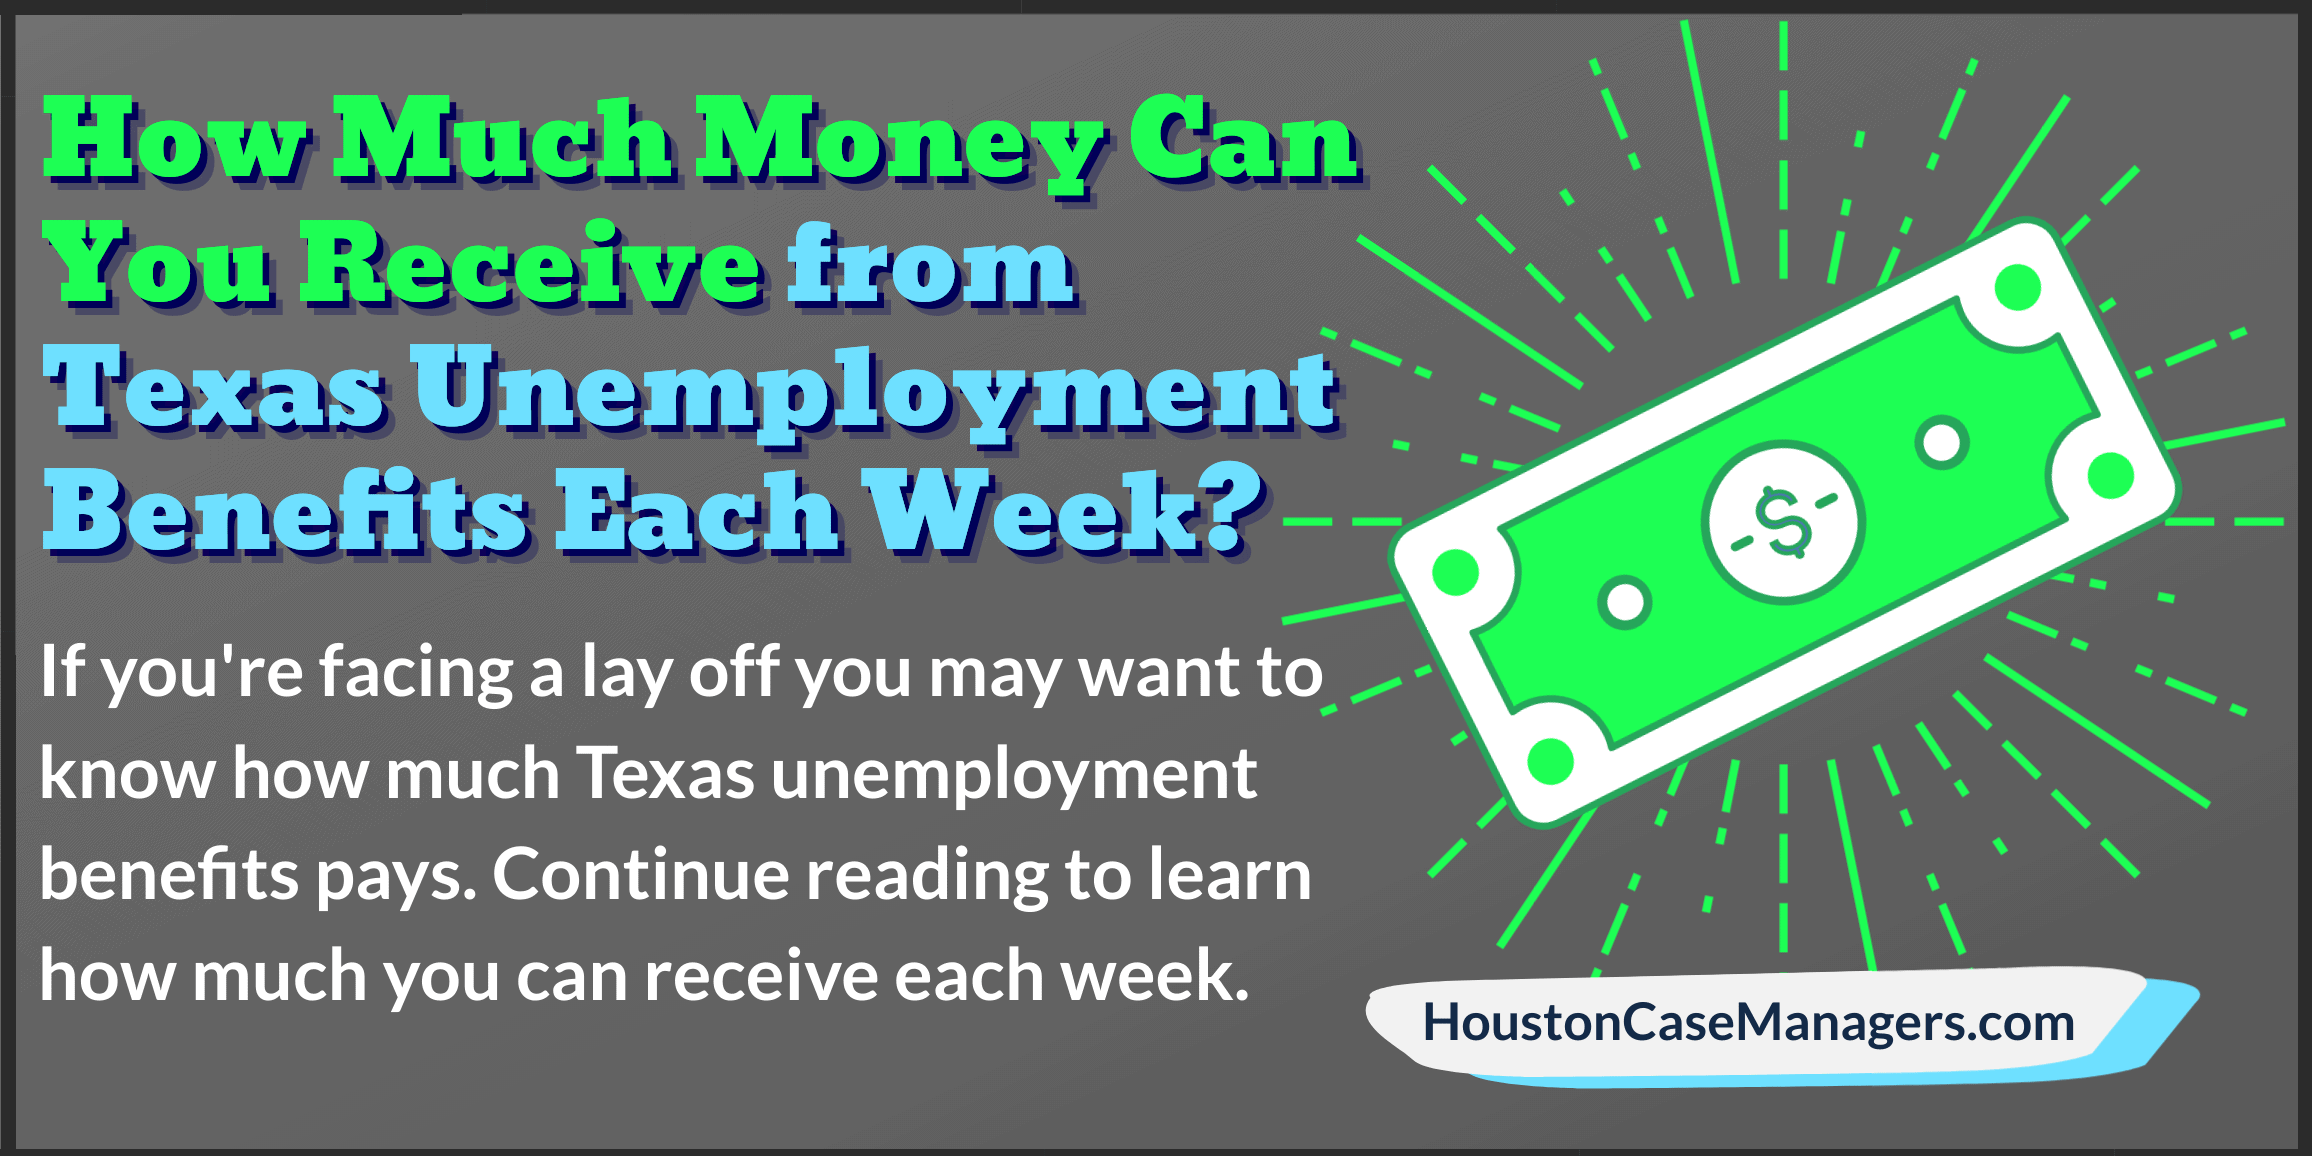 how much money can you receive from texas unemployment each week